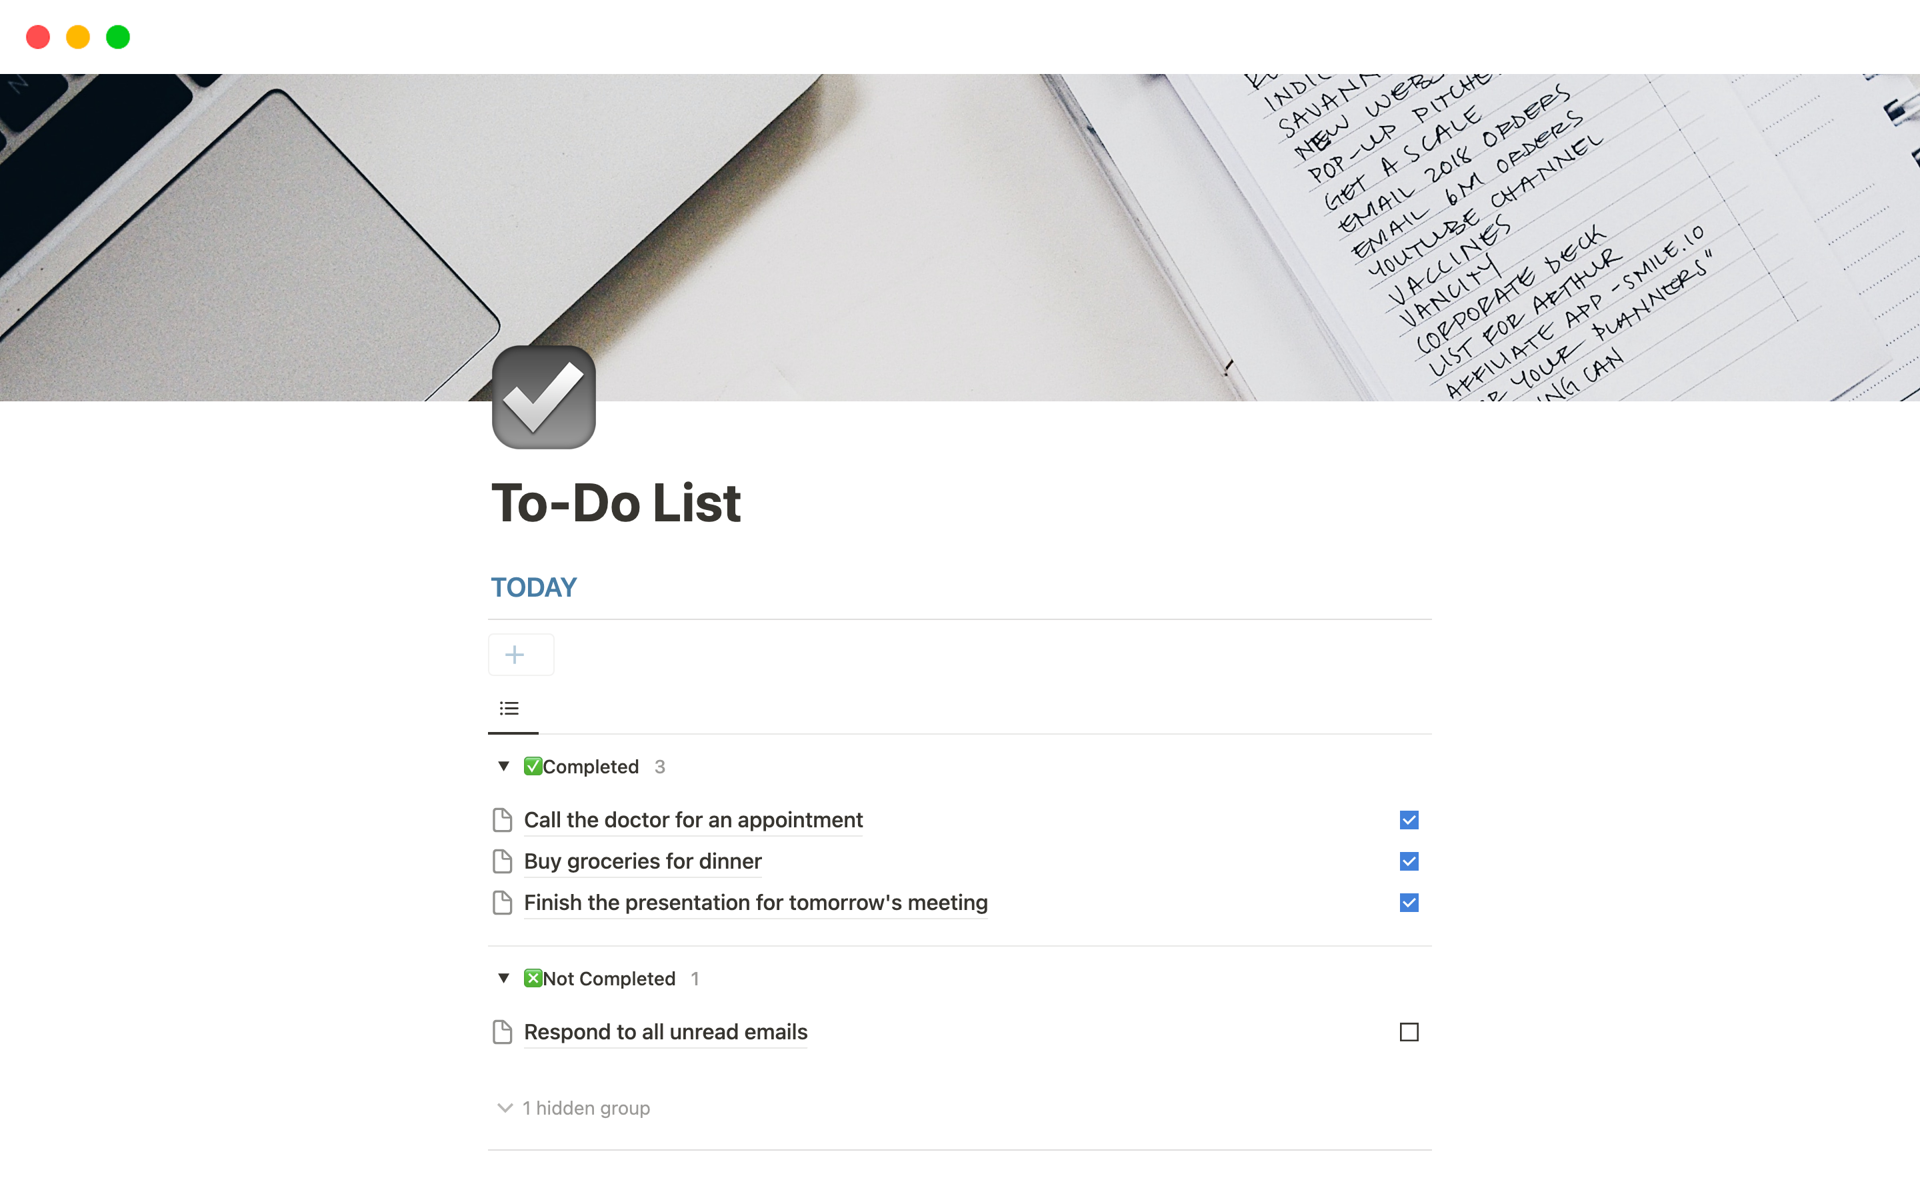 This simple template helps you manage your to-do list with a status section to keep track of completed and pending tasks.